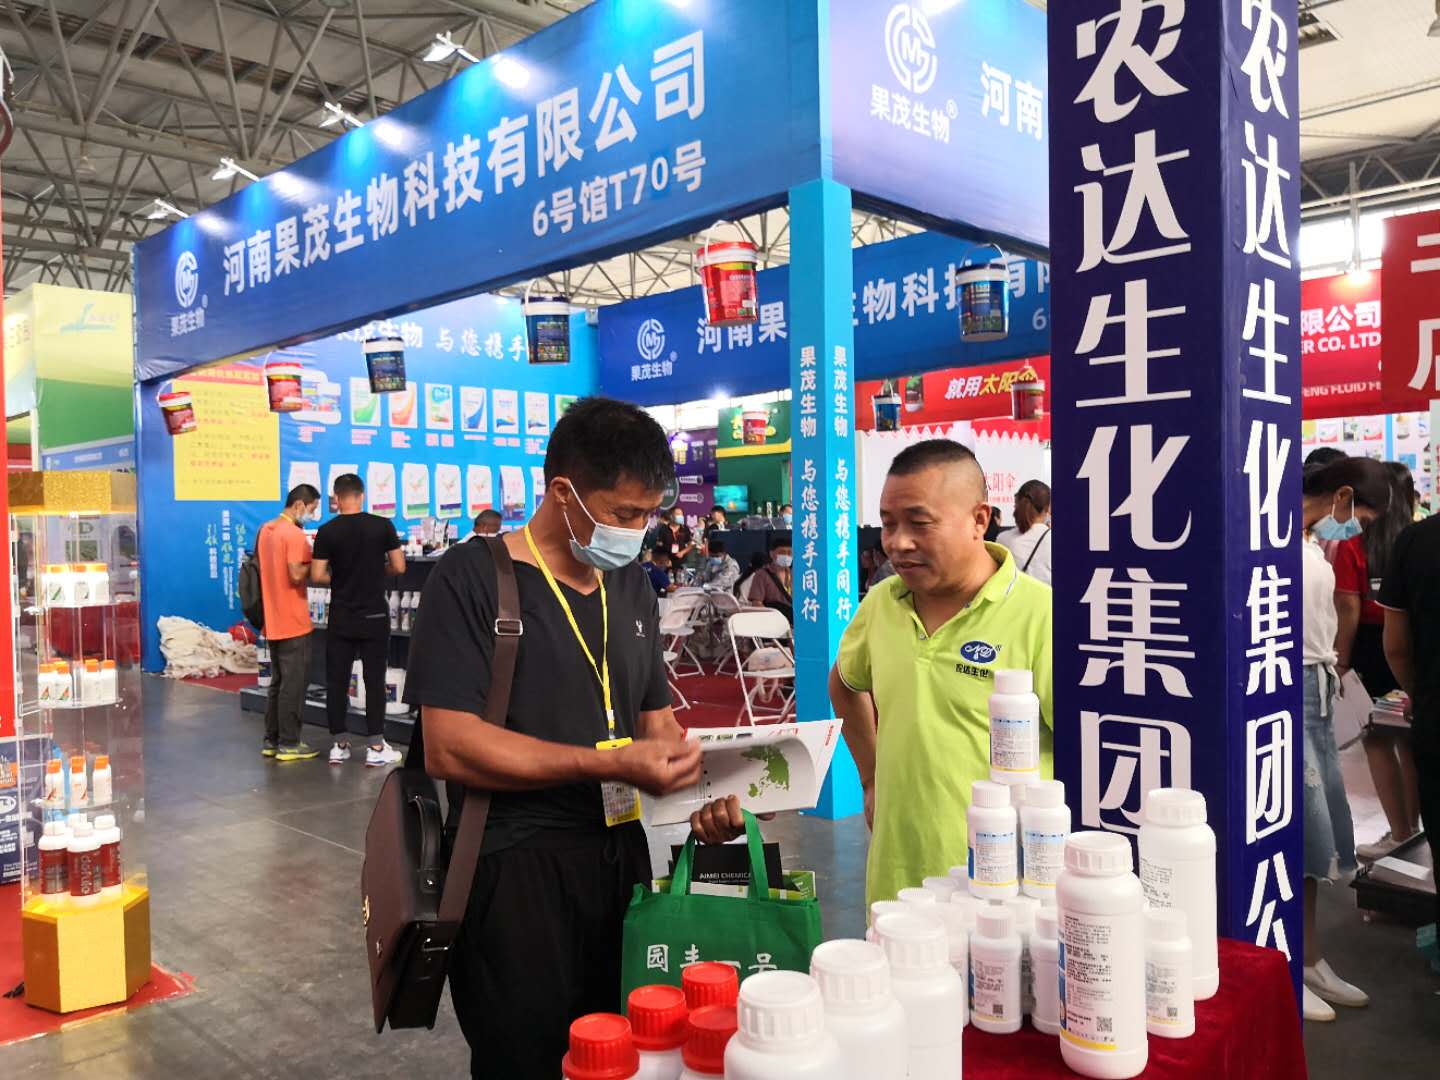 Our company participated in the 17th Southwest Agricultural Materials Expo(图2)